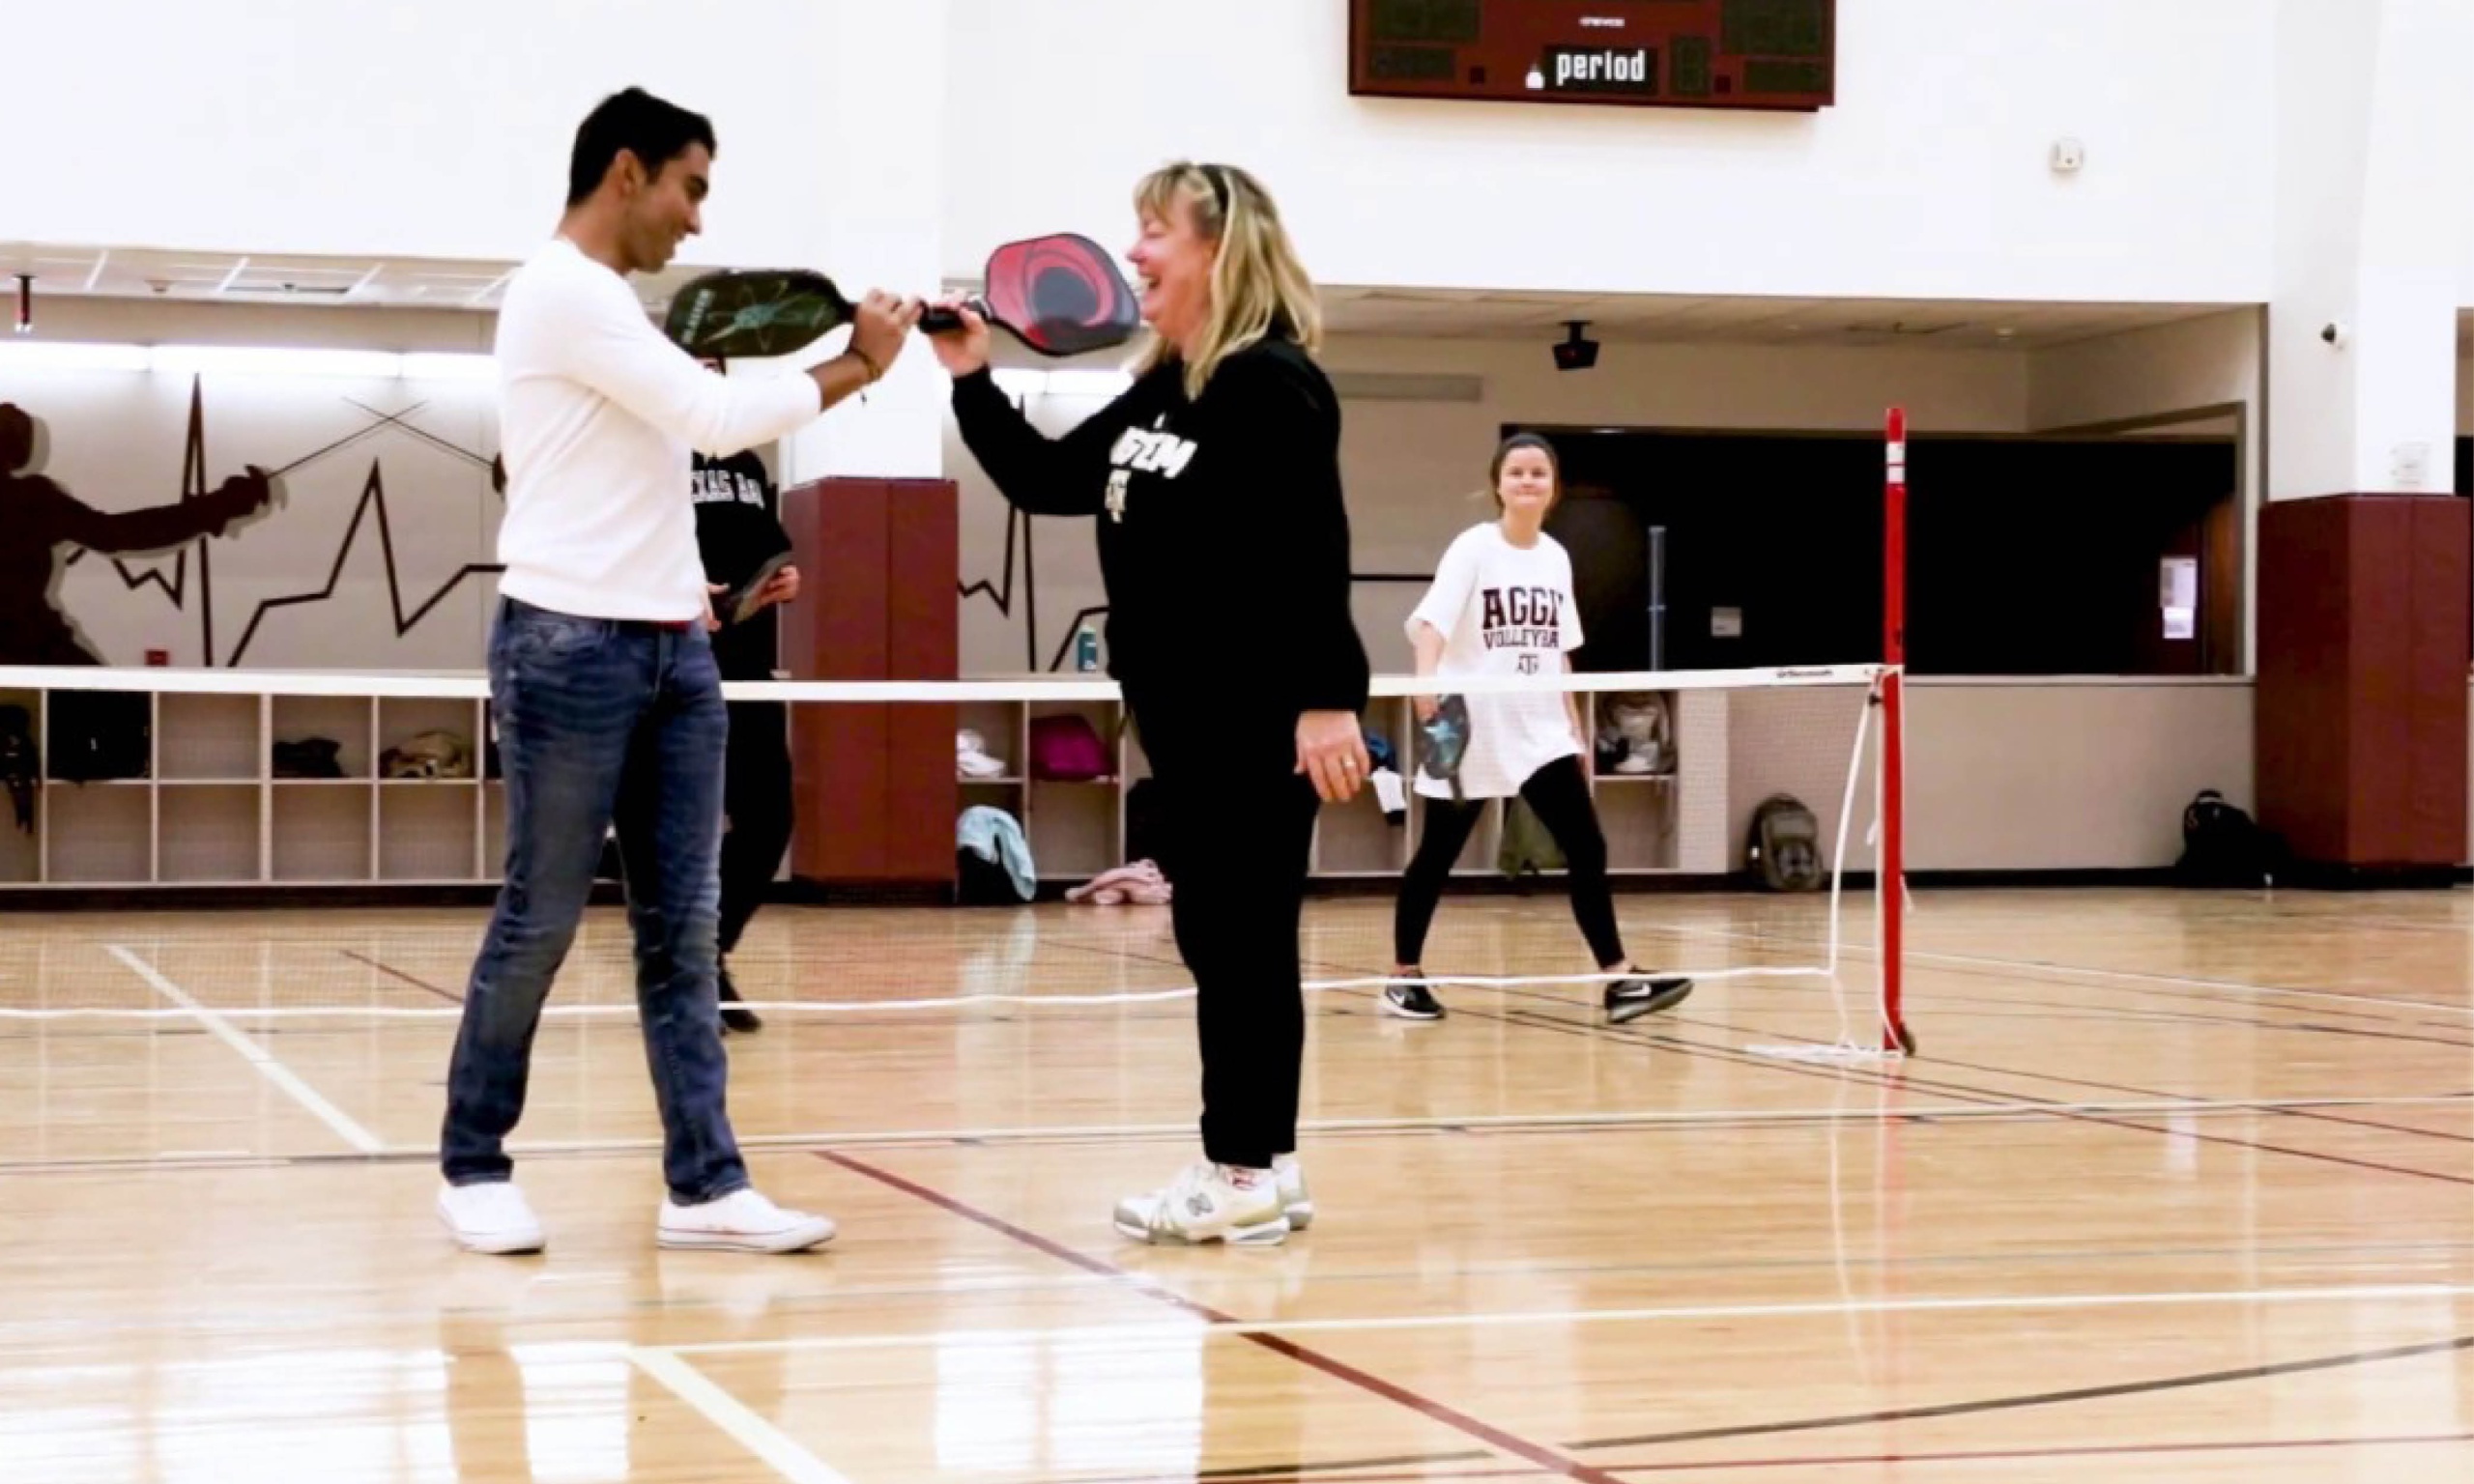 Two people playing badminton in a gym.